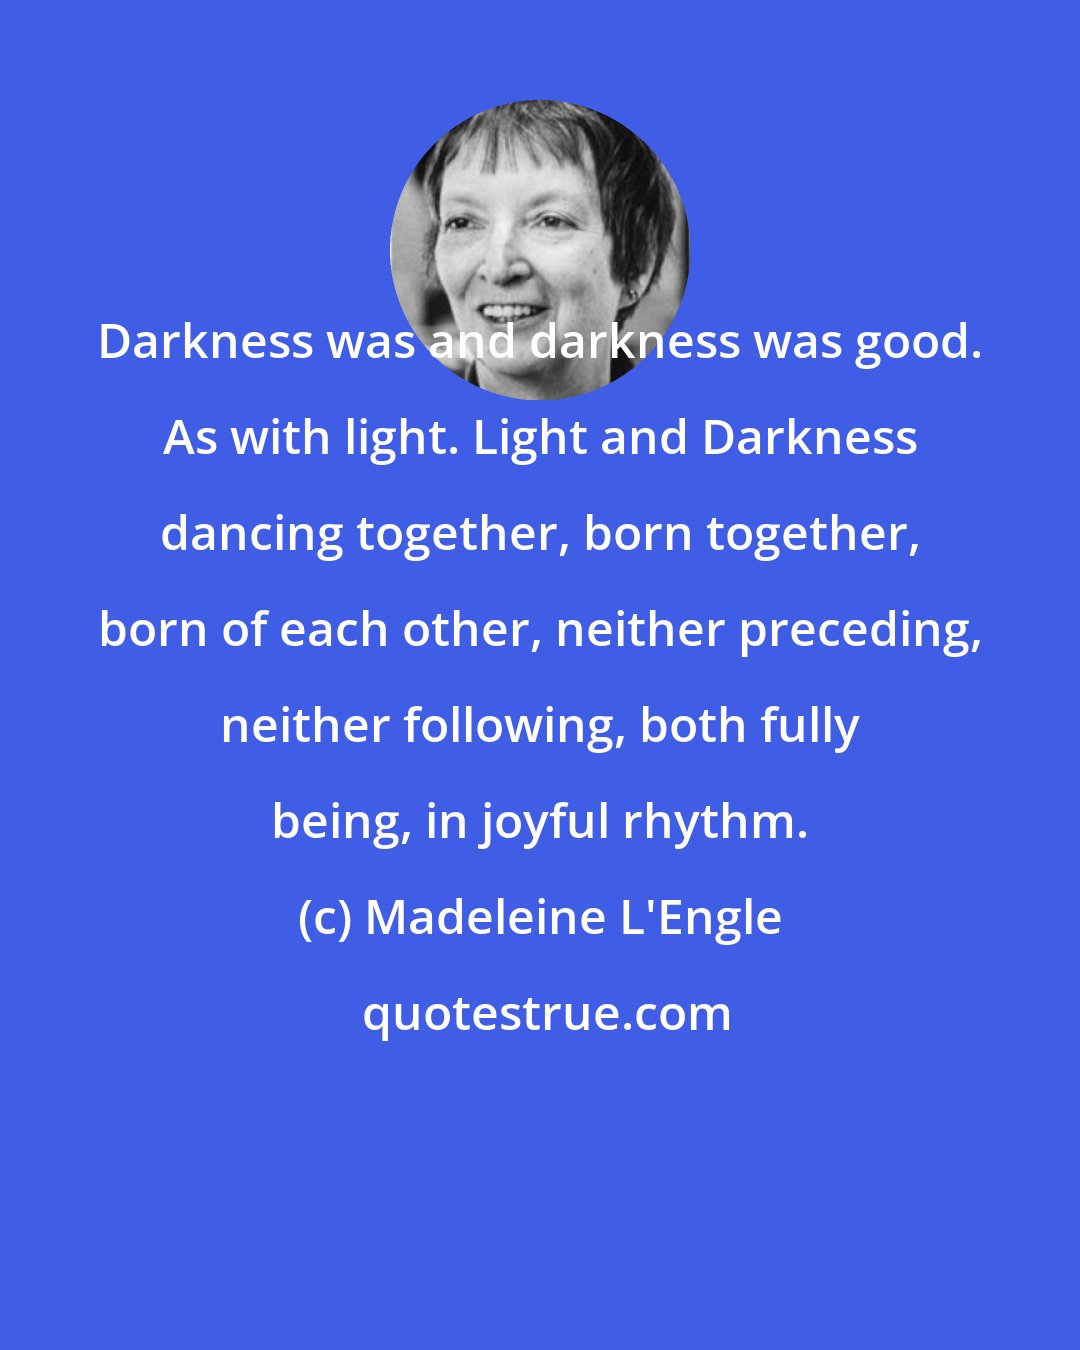 Madeleine L'Engle: Darkness was and darkness was good. As with light. Light and Darkness dancing together, born together, born of each other, neither preceding, neither following, both fully being, in joyful rhythm.